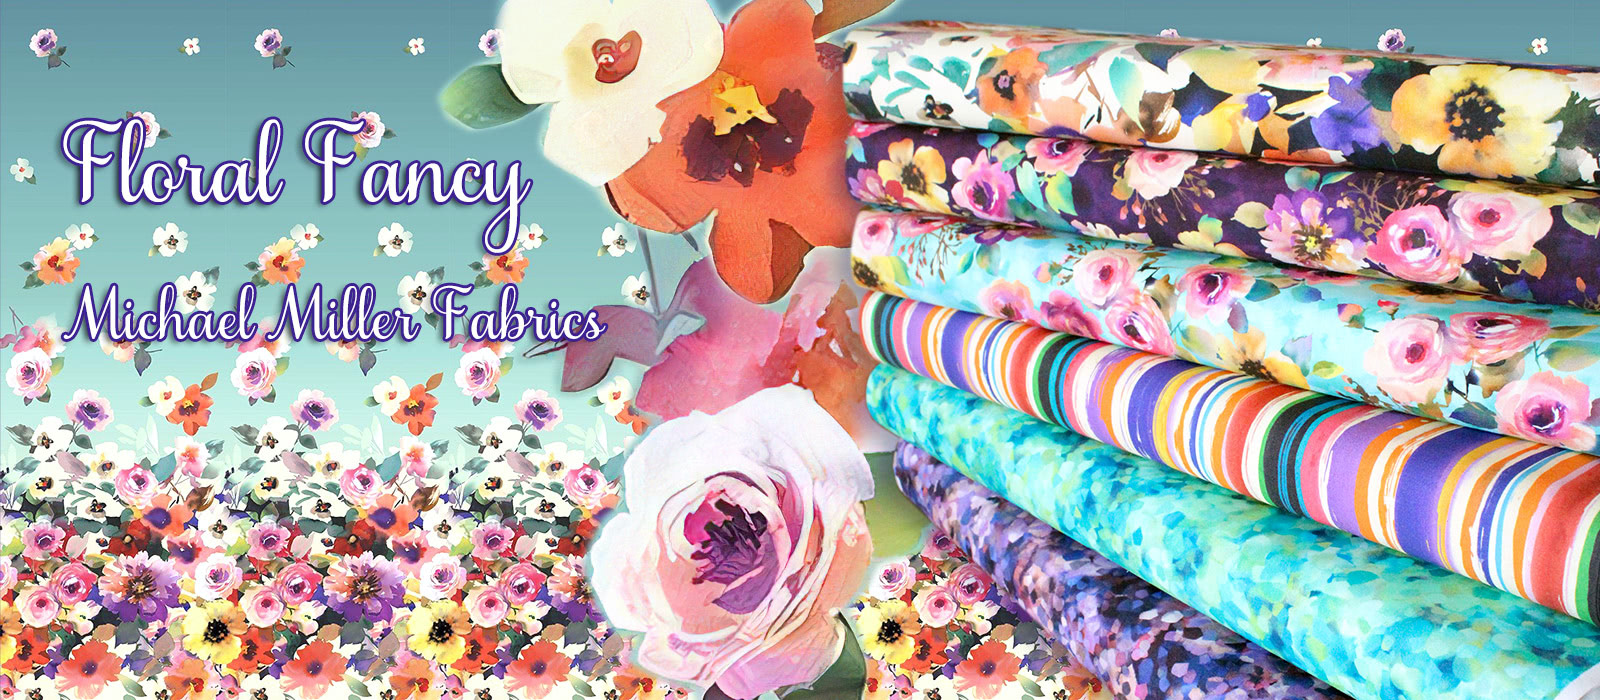 Michael Miller Fabrics Floral Fancy Collection